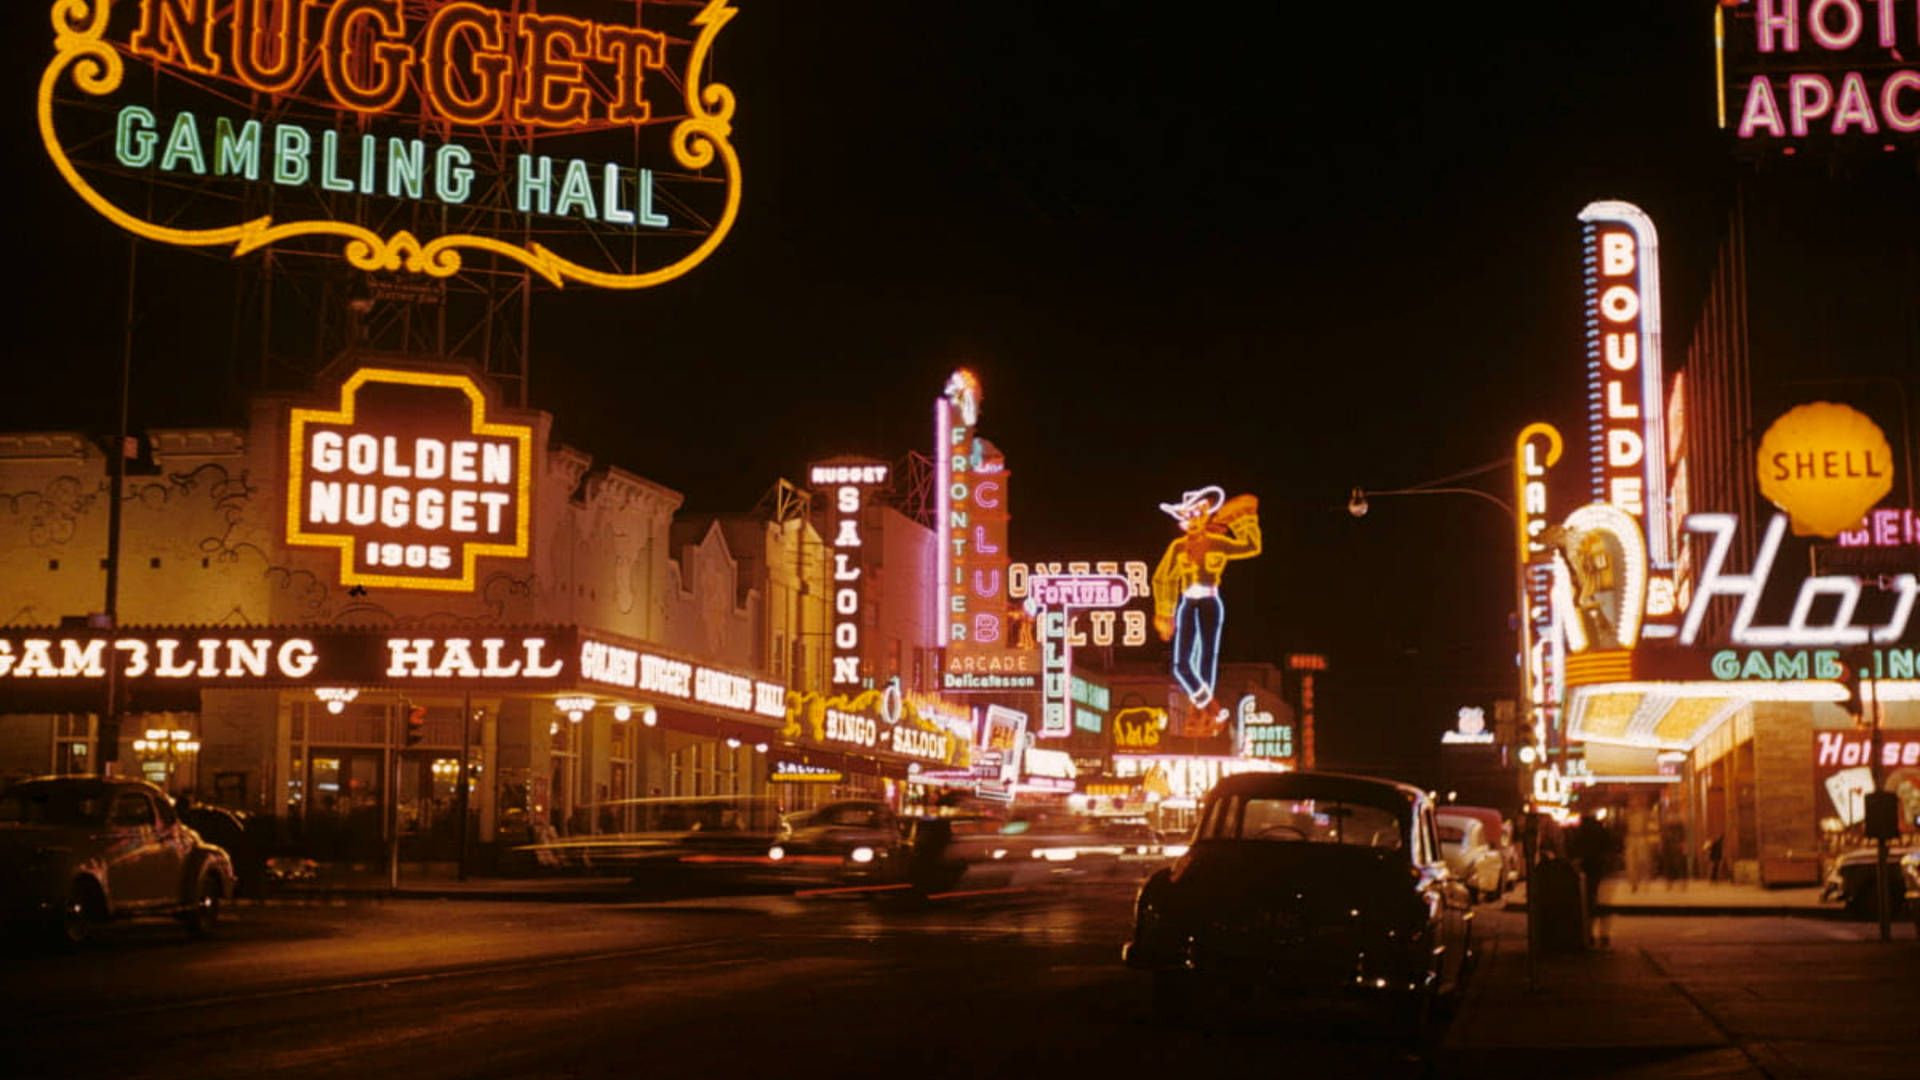 A busy street at night with cars and neon signs - Las Vegas